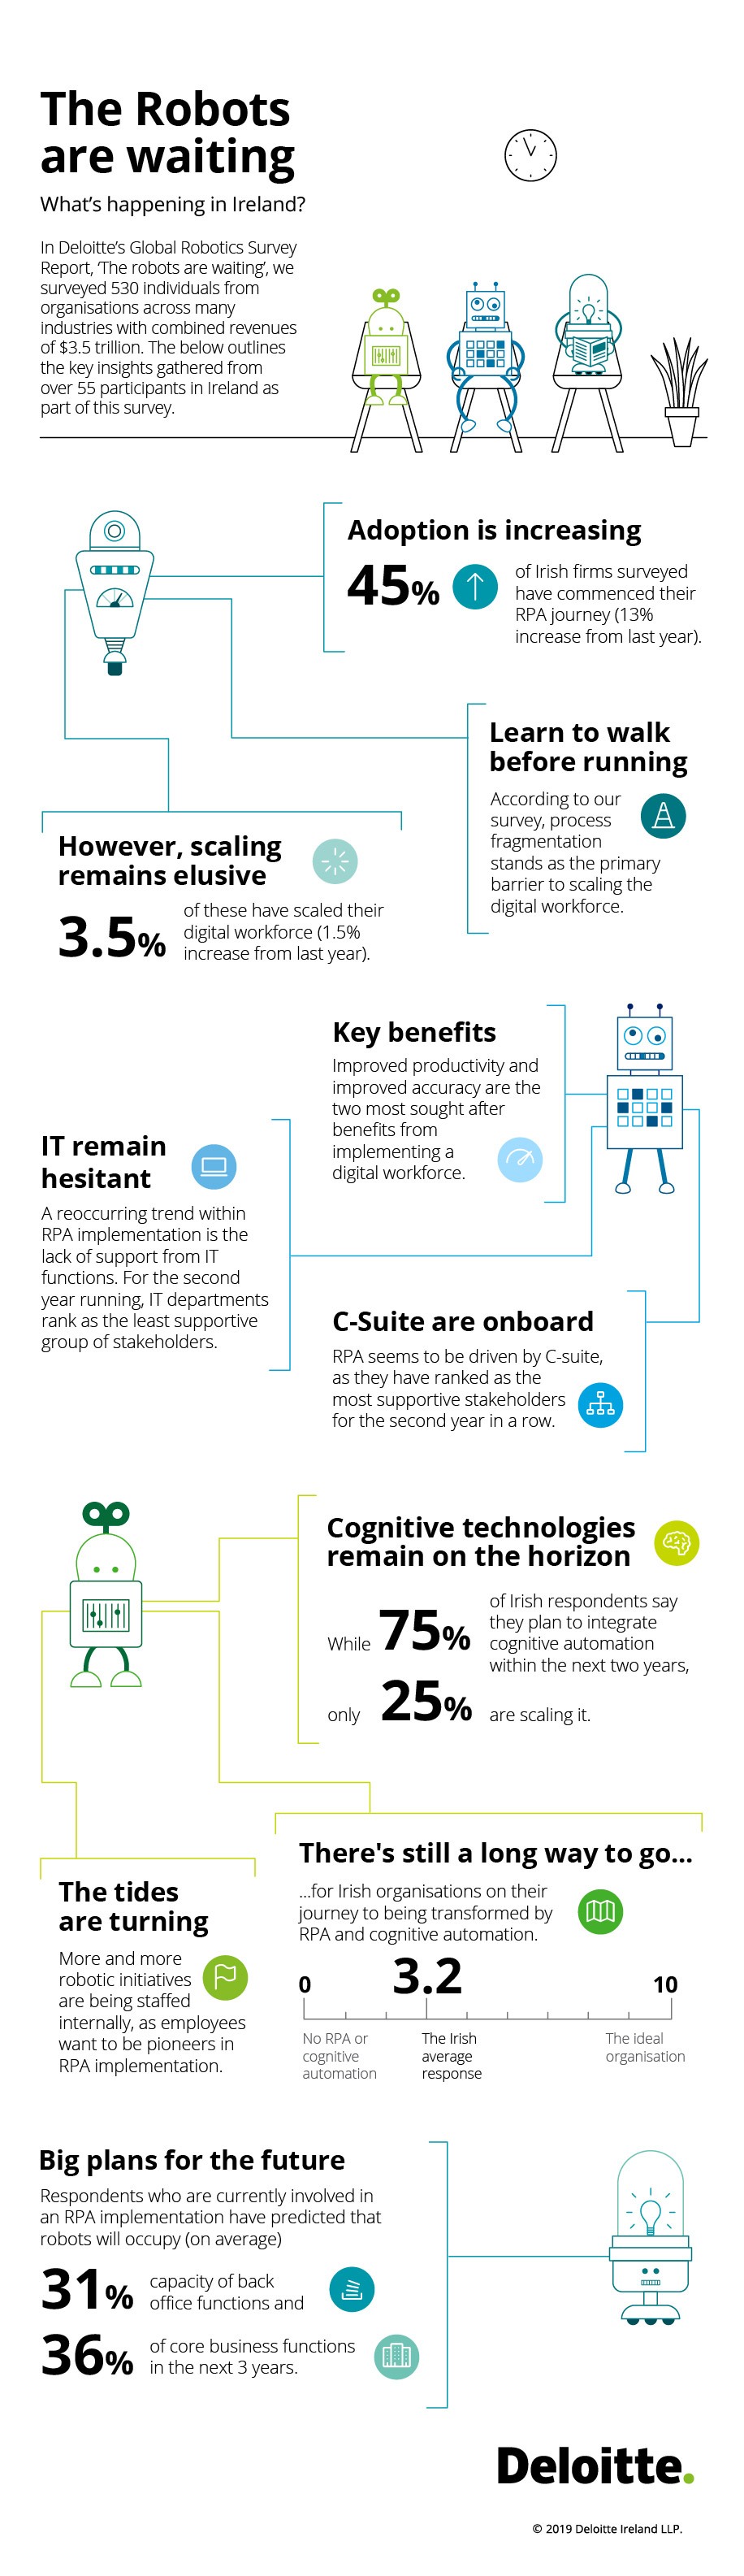 Infographic summarising the results of the Deloitte survey, which can be accessed by clicking the link.